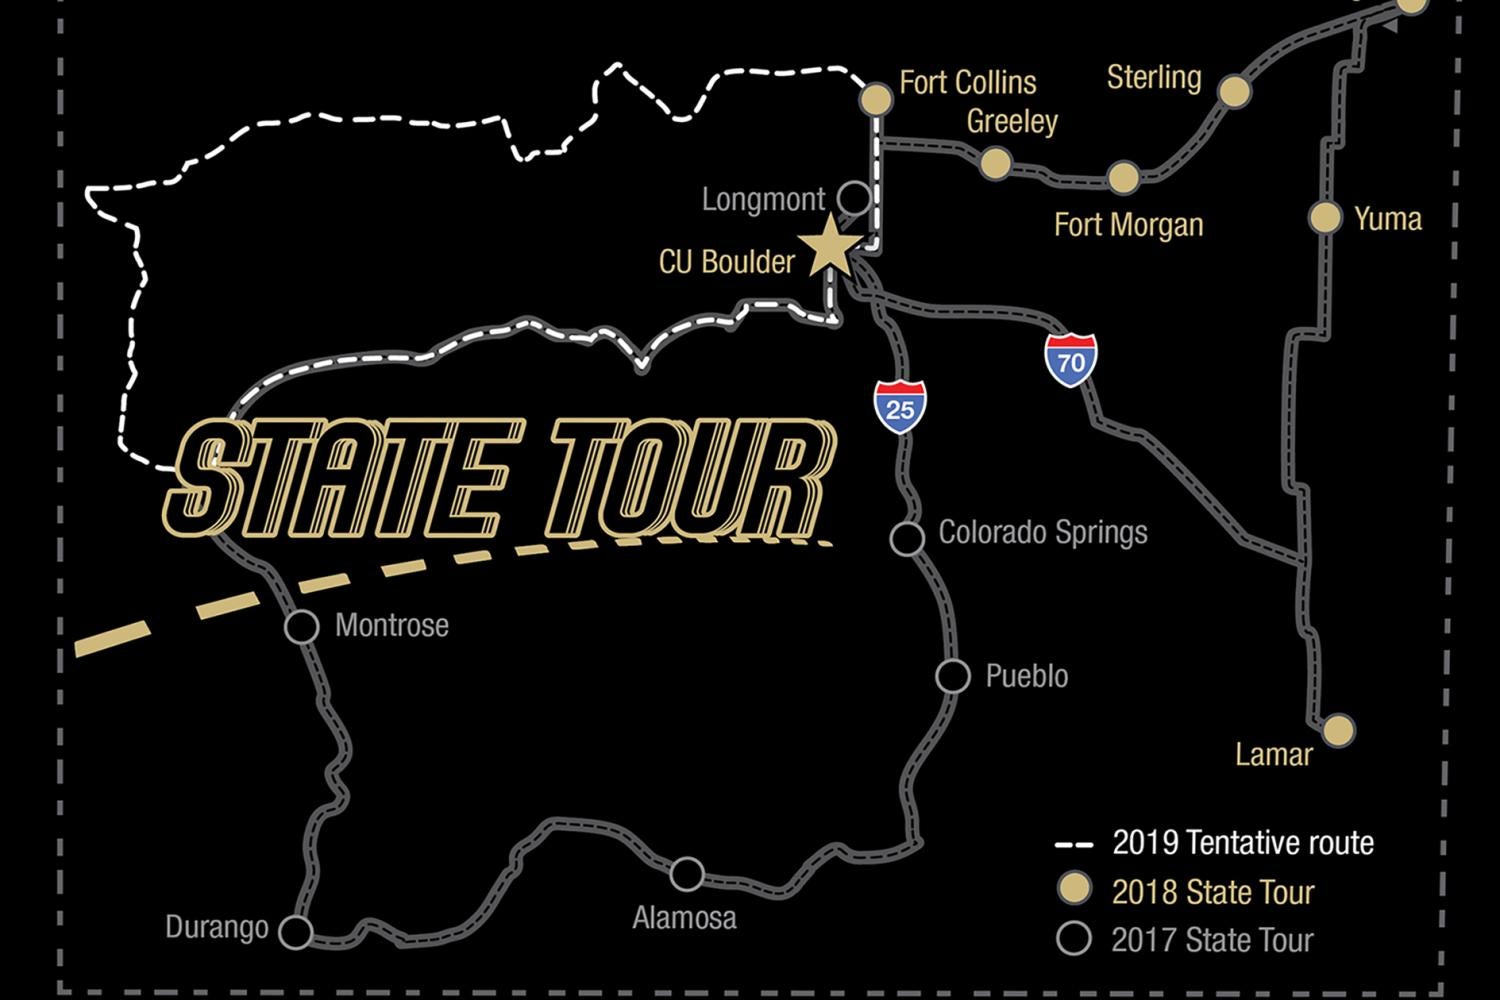 Dean's state tour map